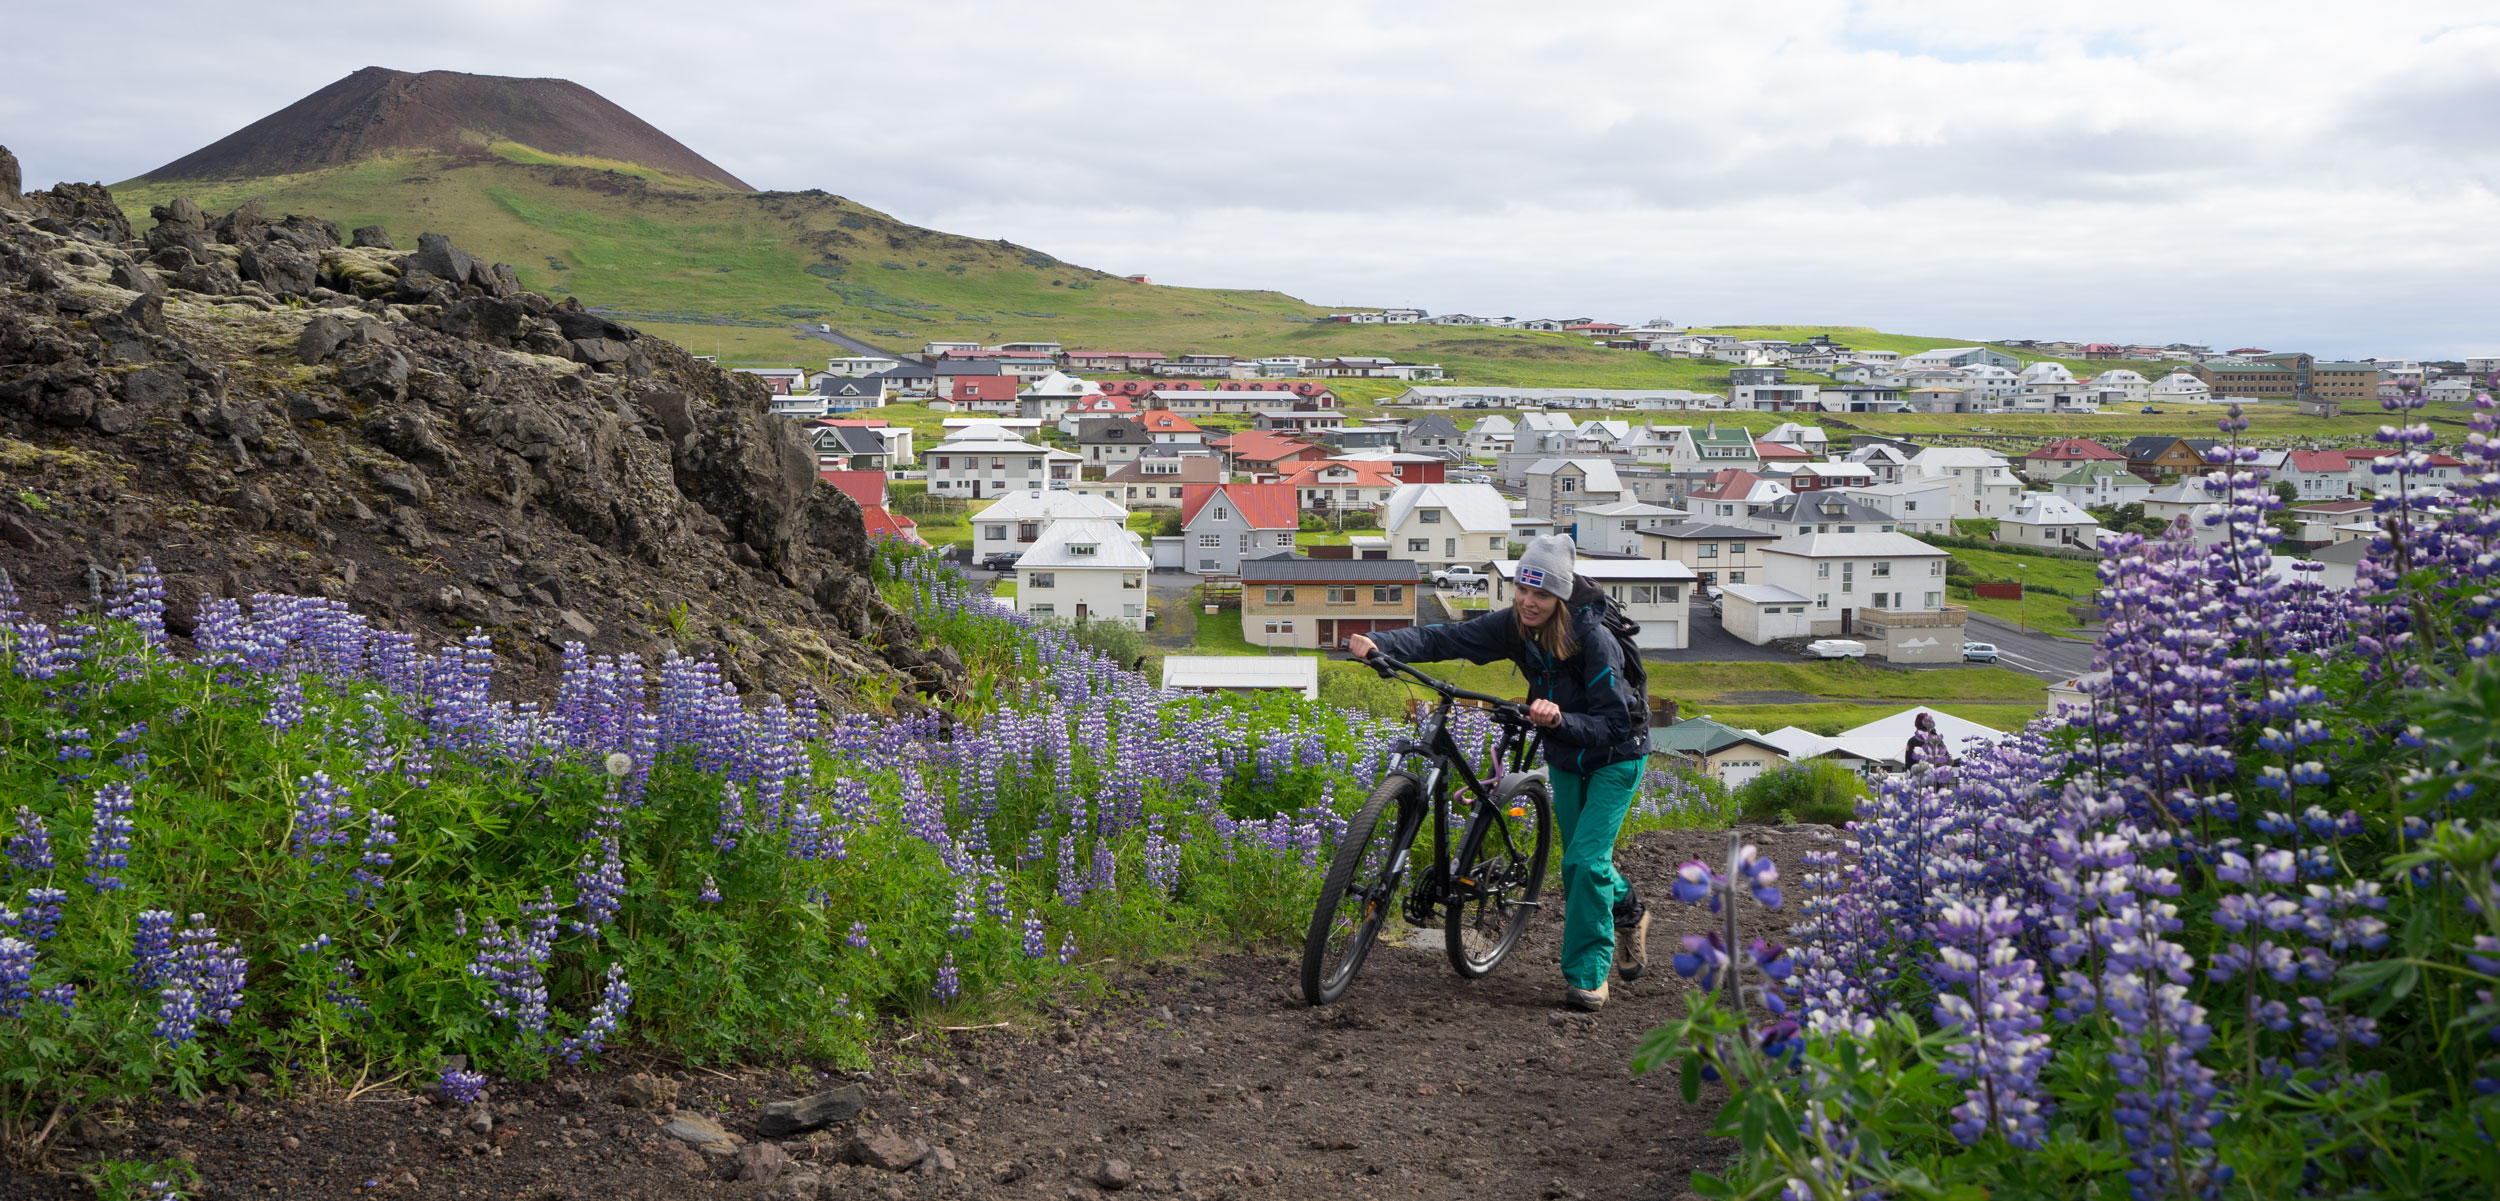 An icelandic woman pushes her bike up a hill surrounded by lupine